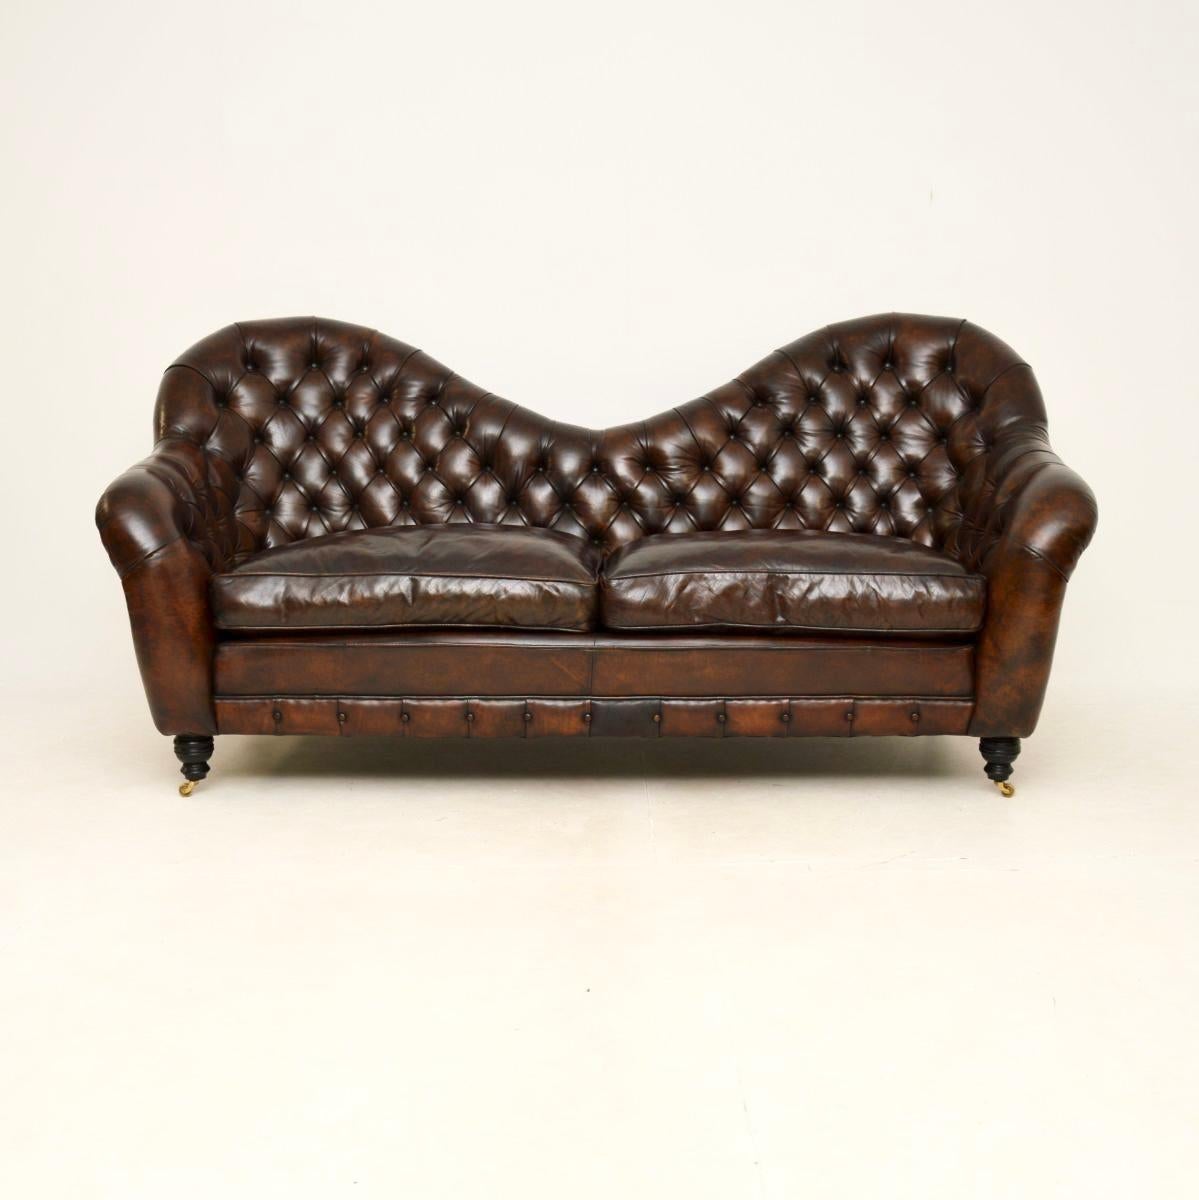 A stunning and extremely well made antique leather Chesterfield style sofa. This was made in England, it dates from around the late 20th century.

This is of super quality and is of very generous proportions. It has a beautiful and impressive